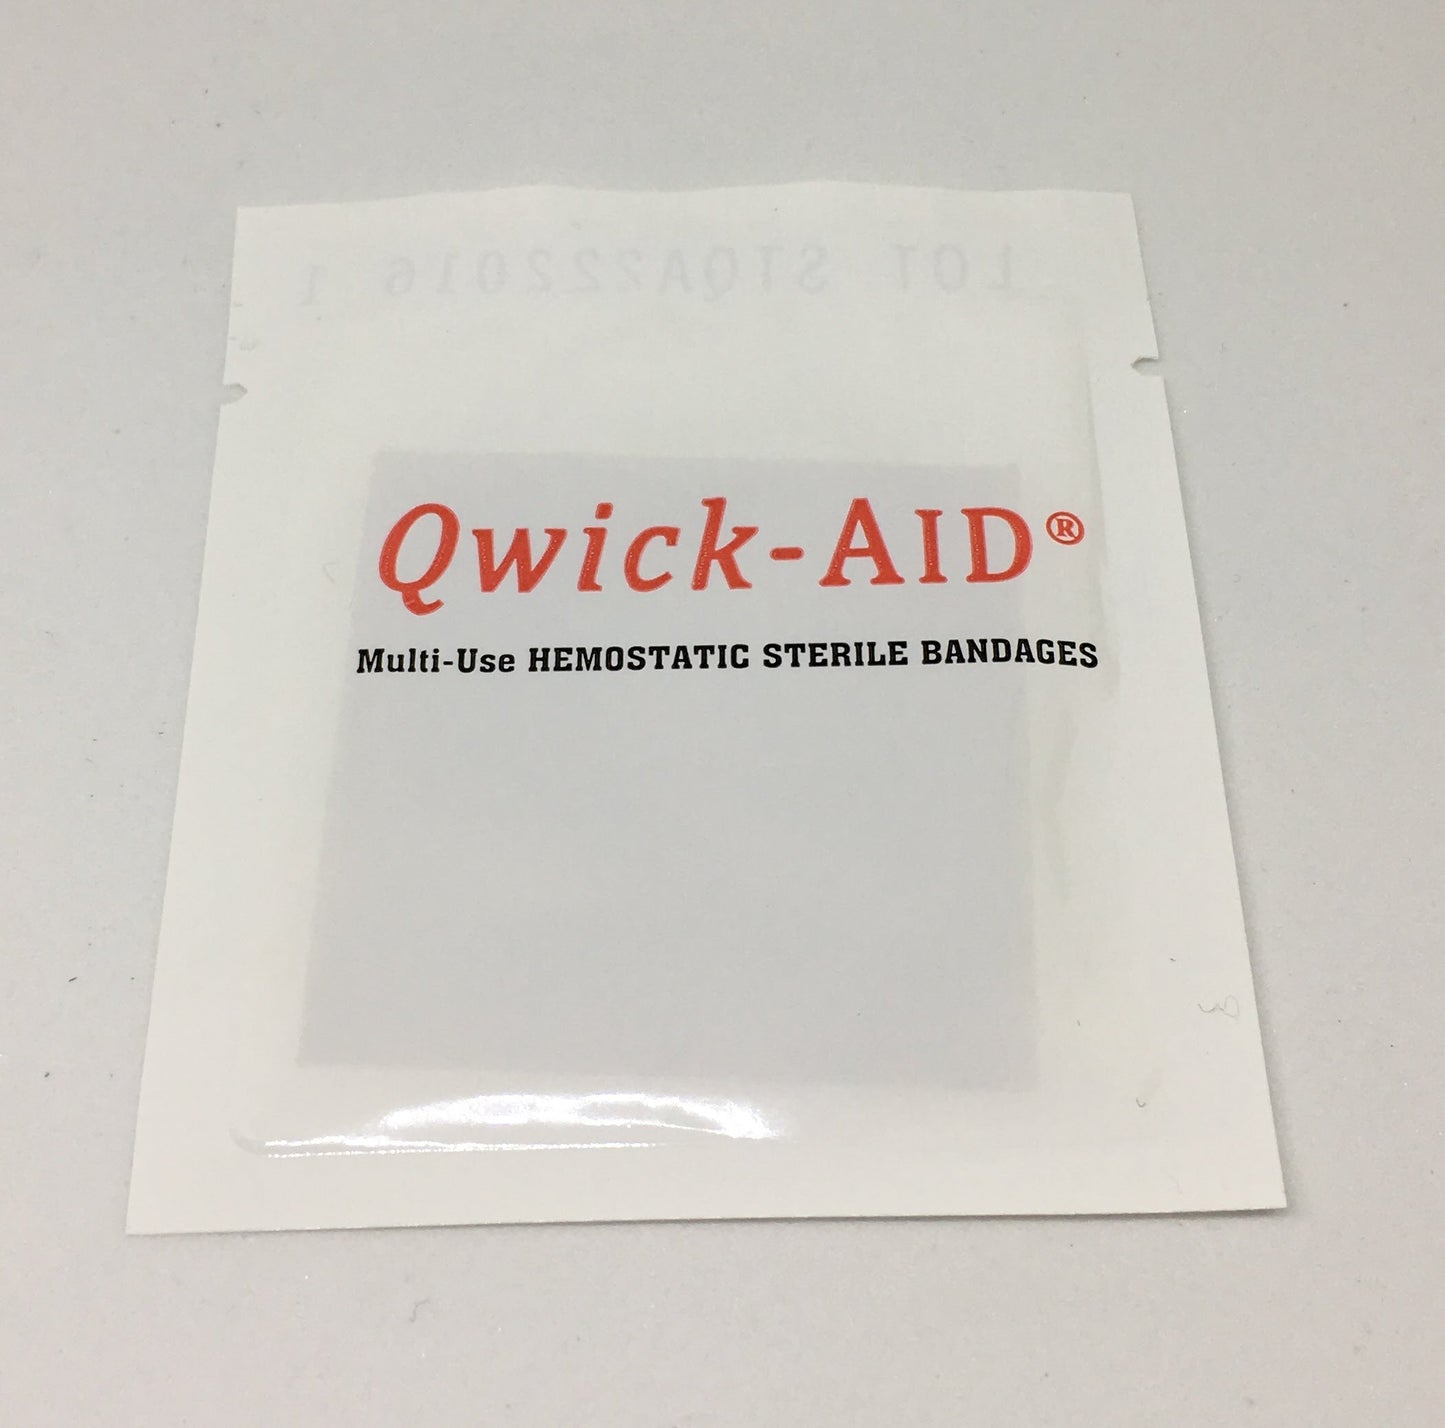 QWICK-AID Bandage (Stops Bleeding in Seconds)